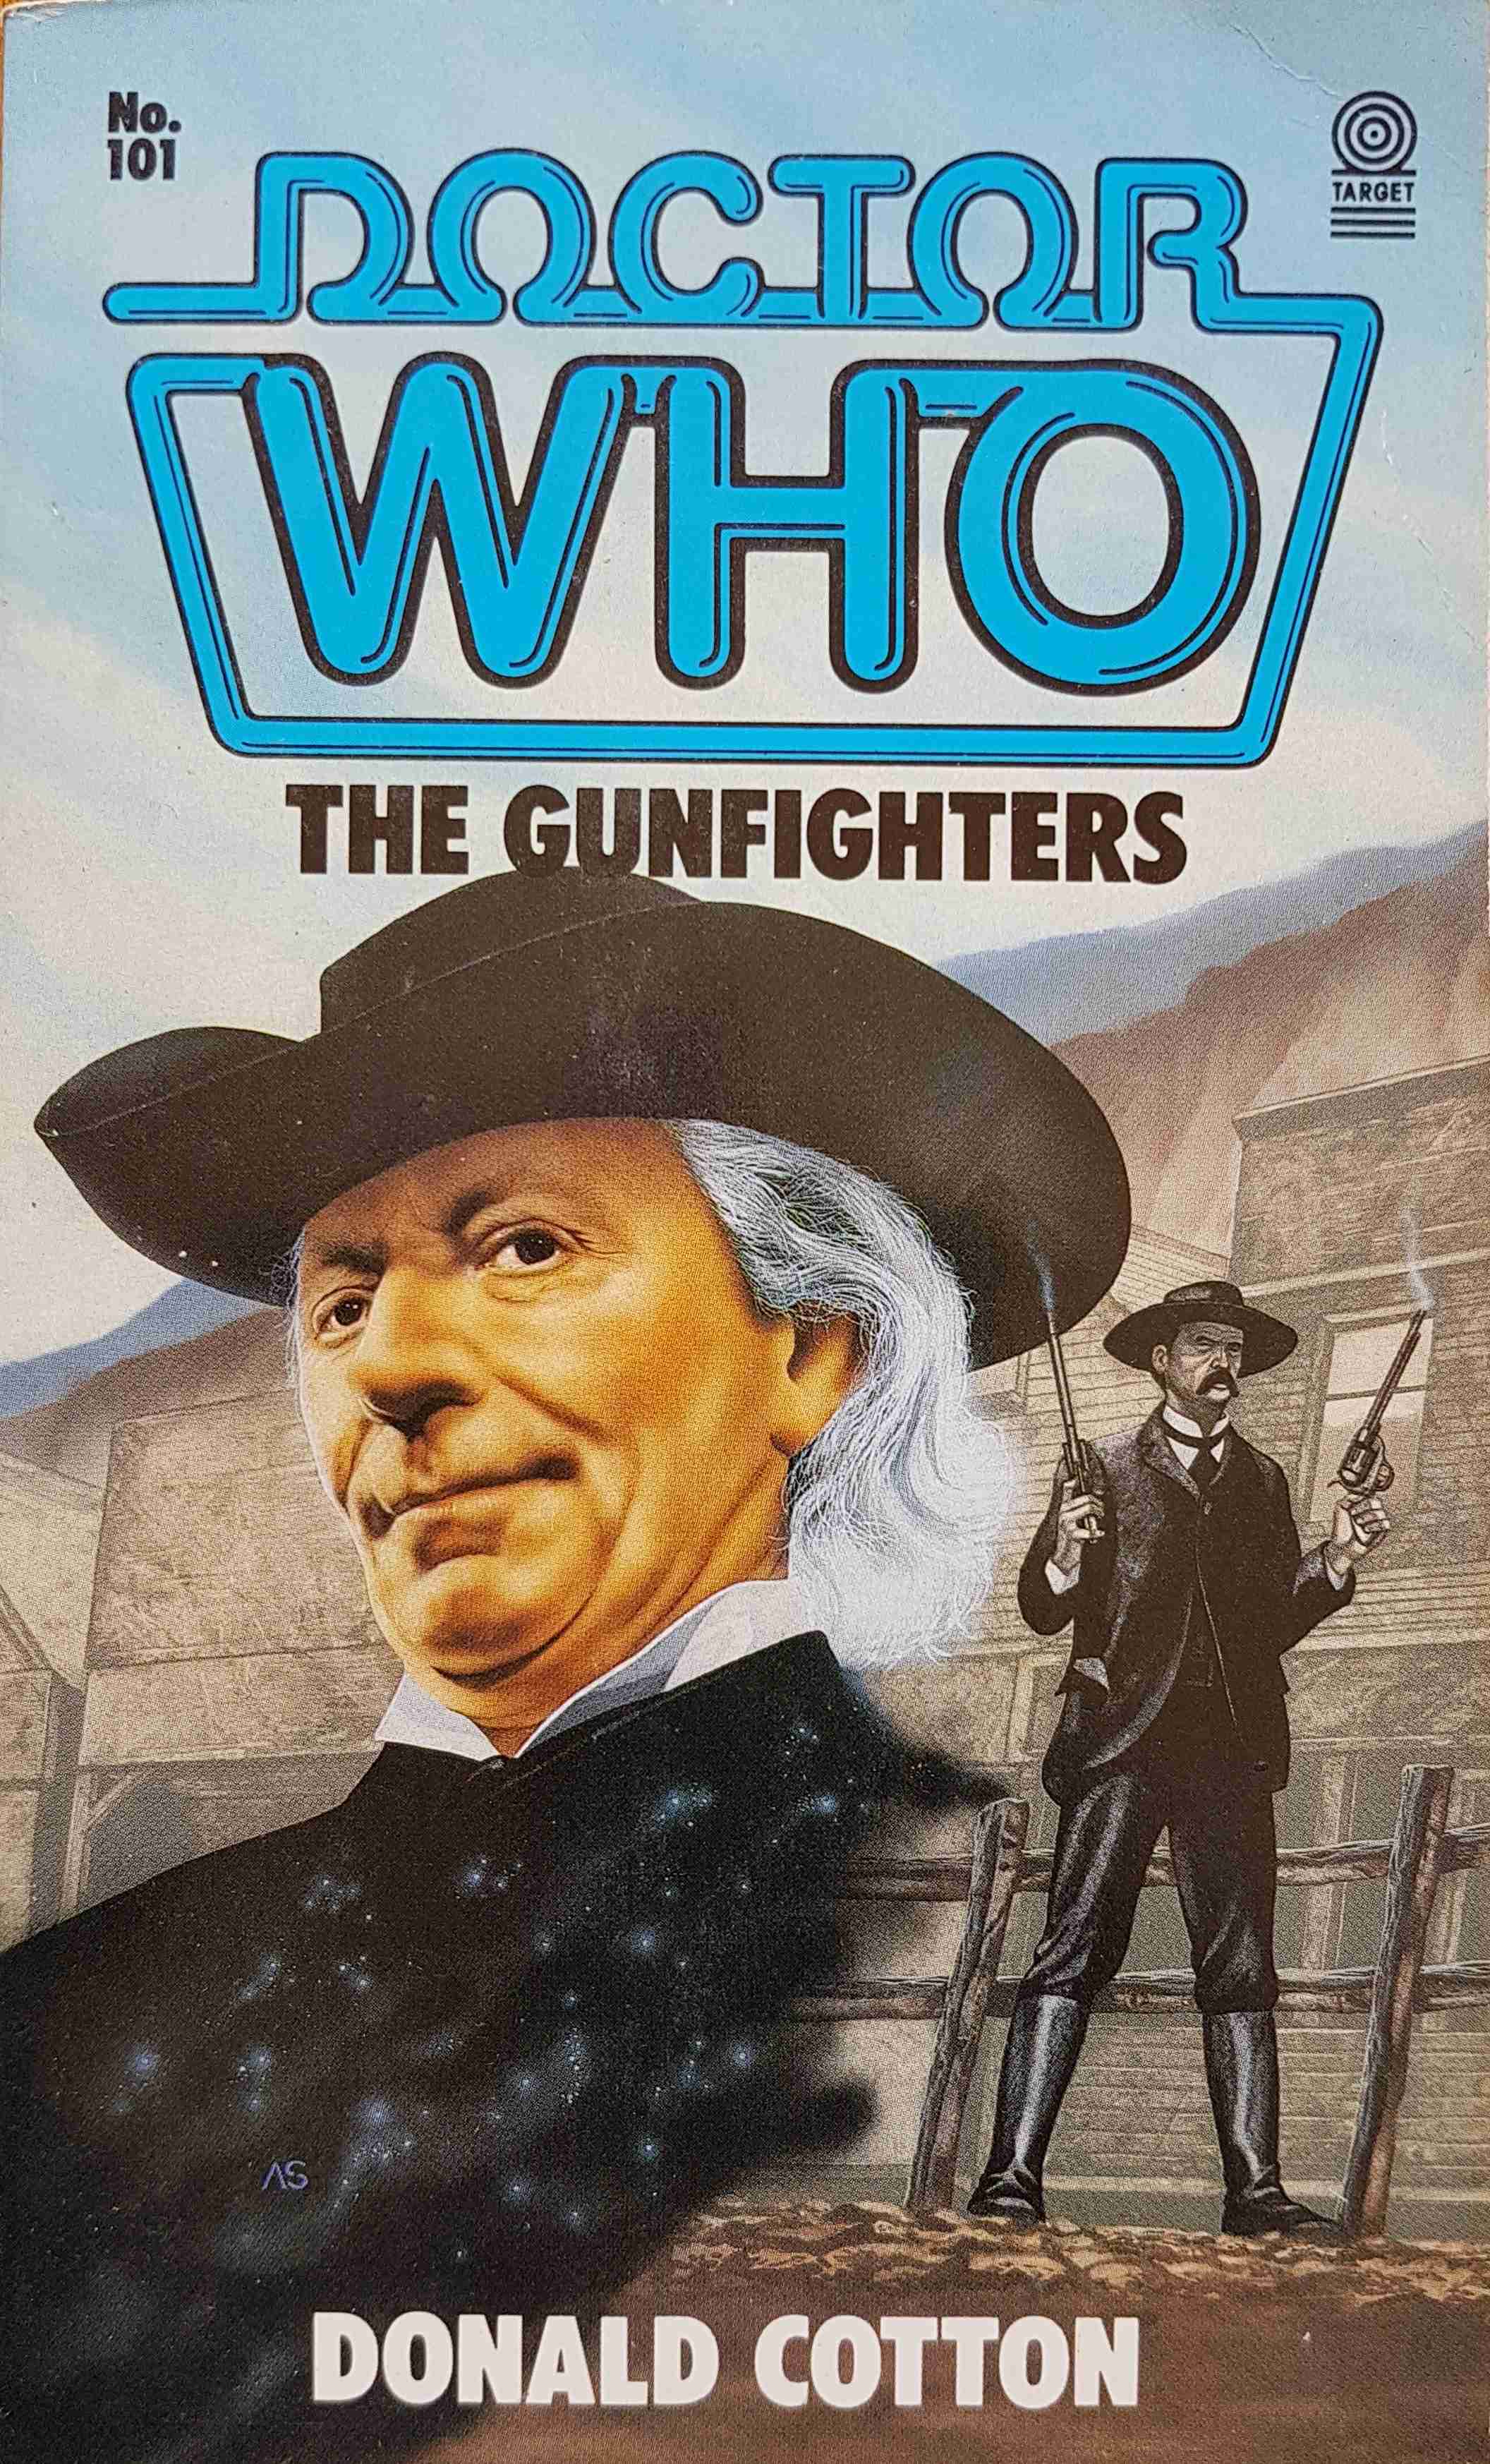 Picture of 0-426-20195-7 Doctor Who - The gunfighters by artist Donald Cotton from the BBC records and Tapes library